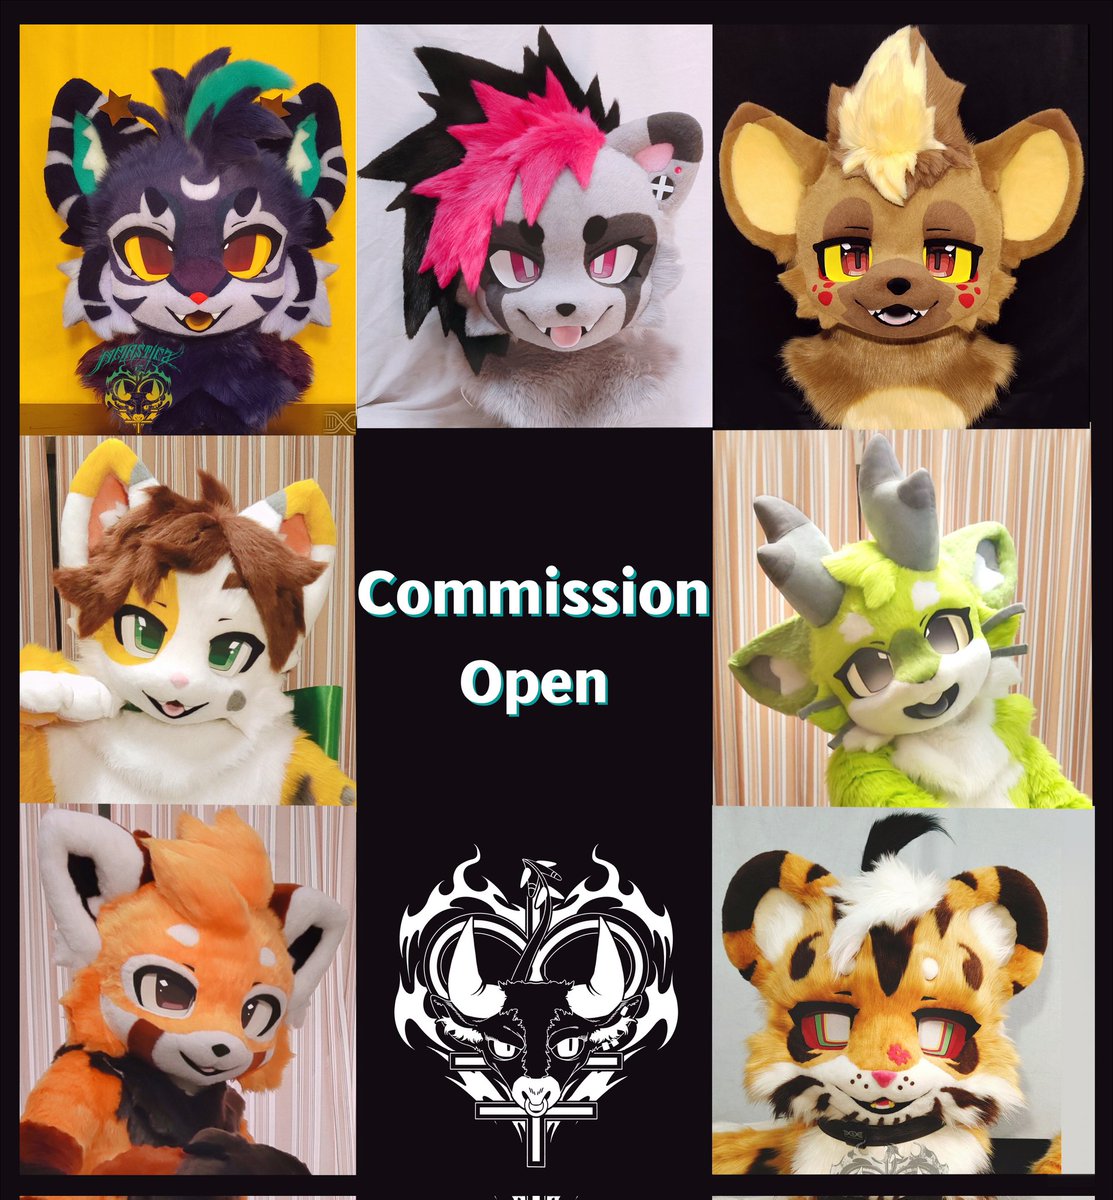 🎊Quote and commission still open! #fursuit 🎉We are capable of making crazy hairstyles and special design. Our goal is to making every character's fursuit unique. 🔽More info: